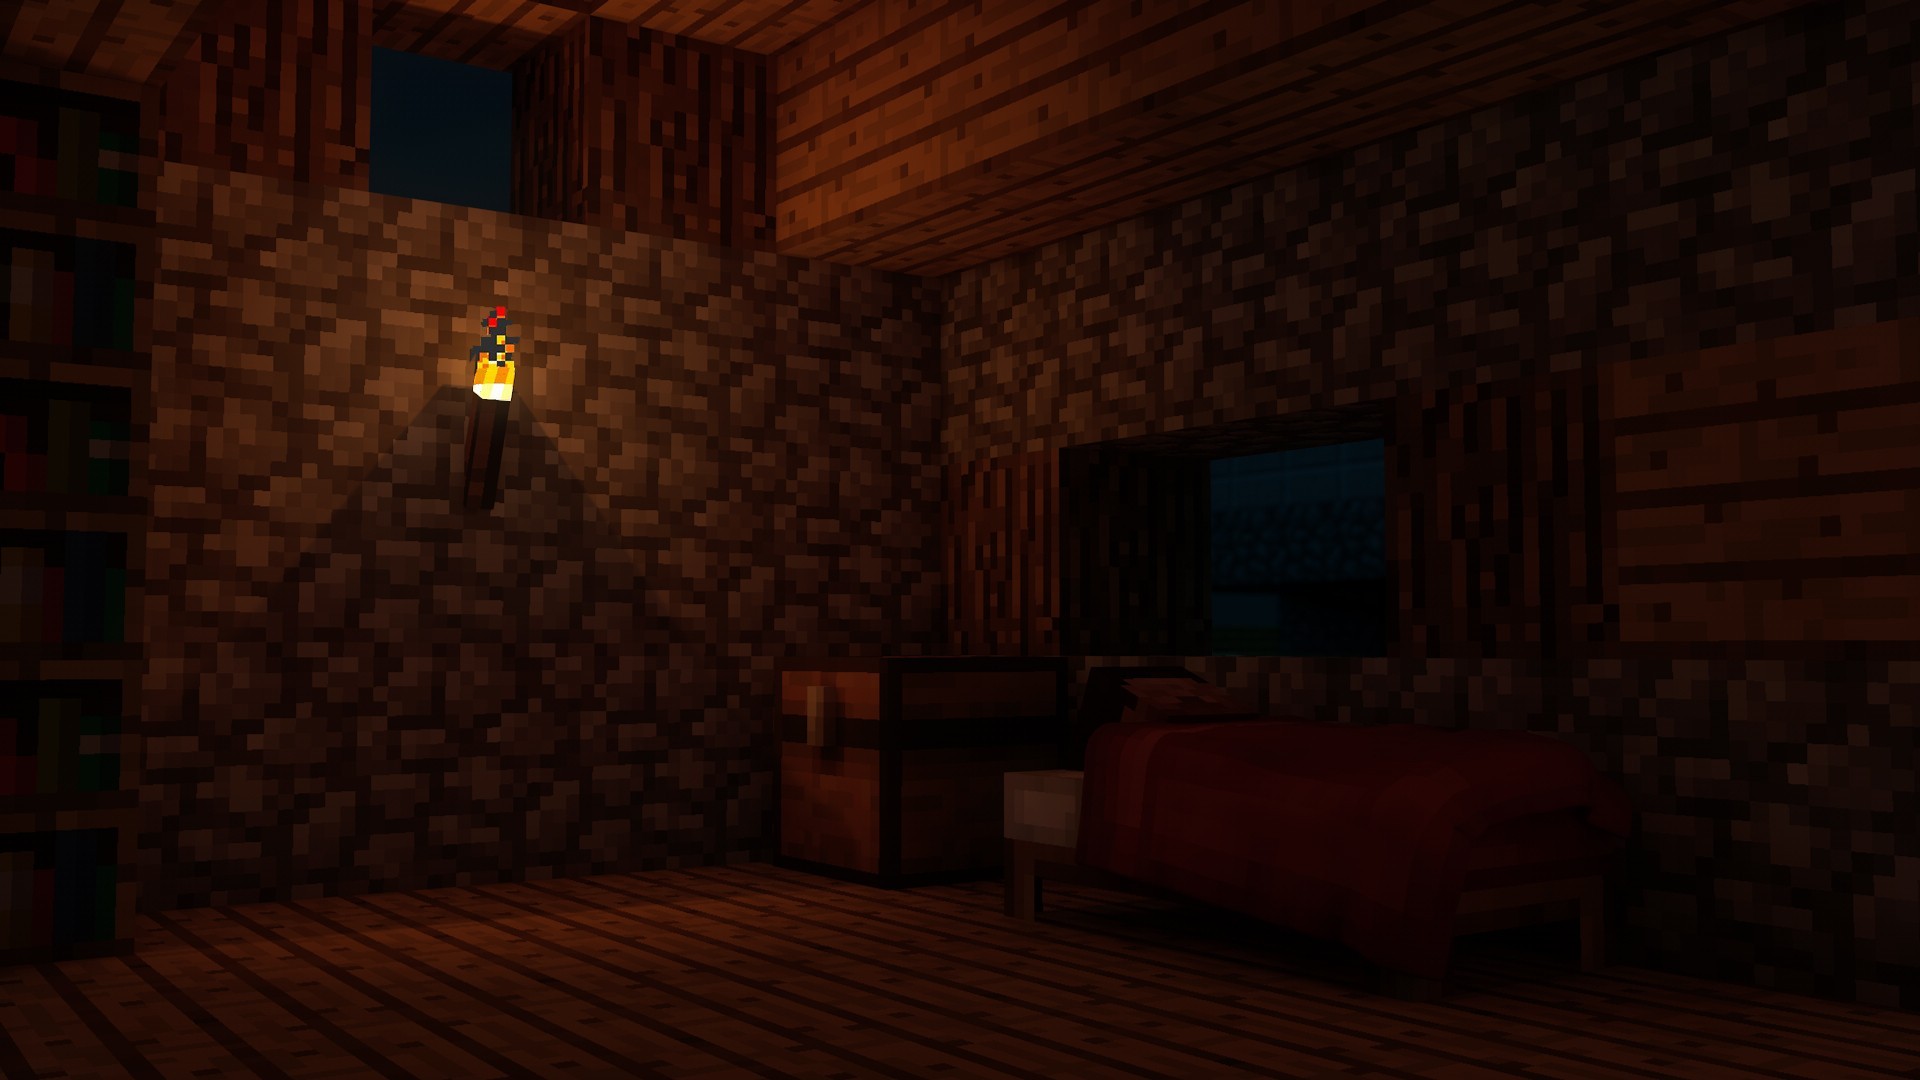 General 1920x1080 Minecraft video games bed house sleeping night PC gaming